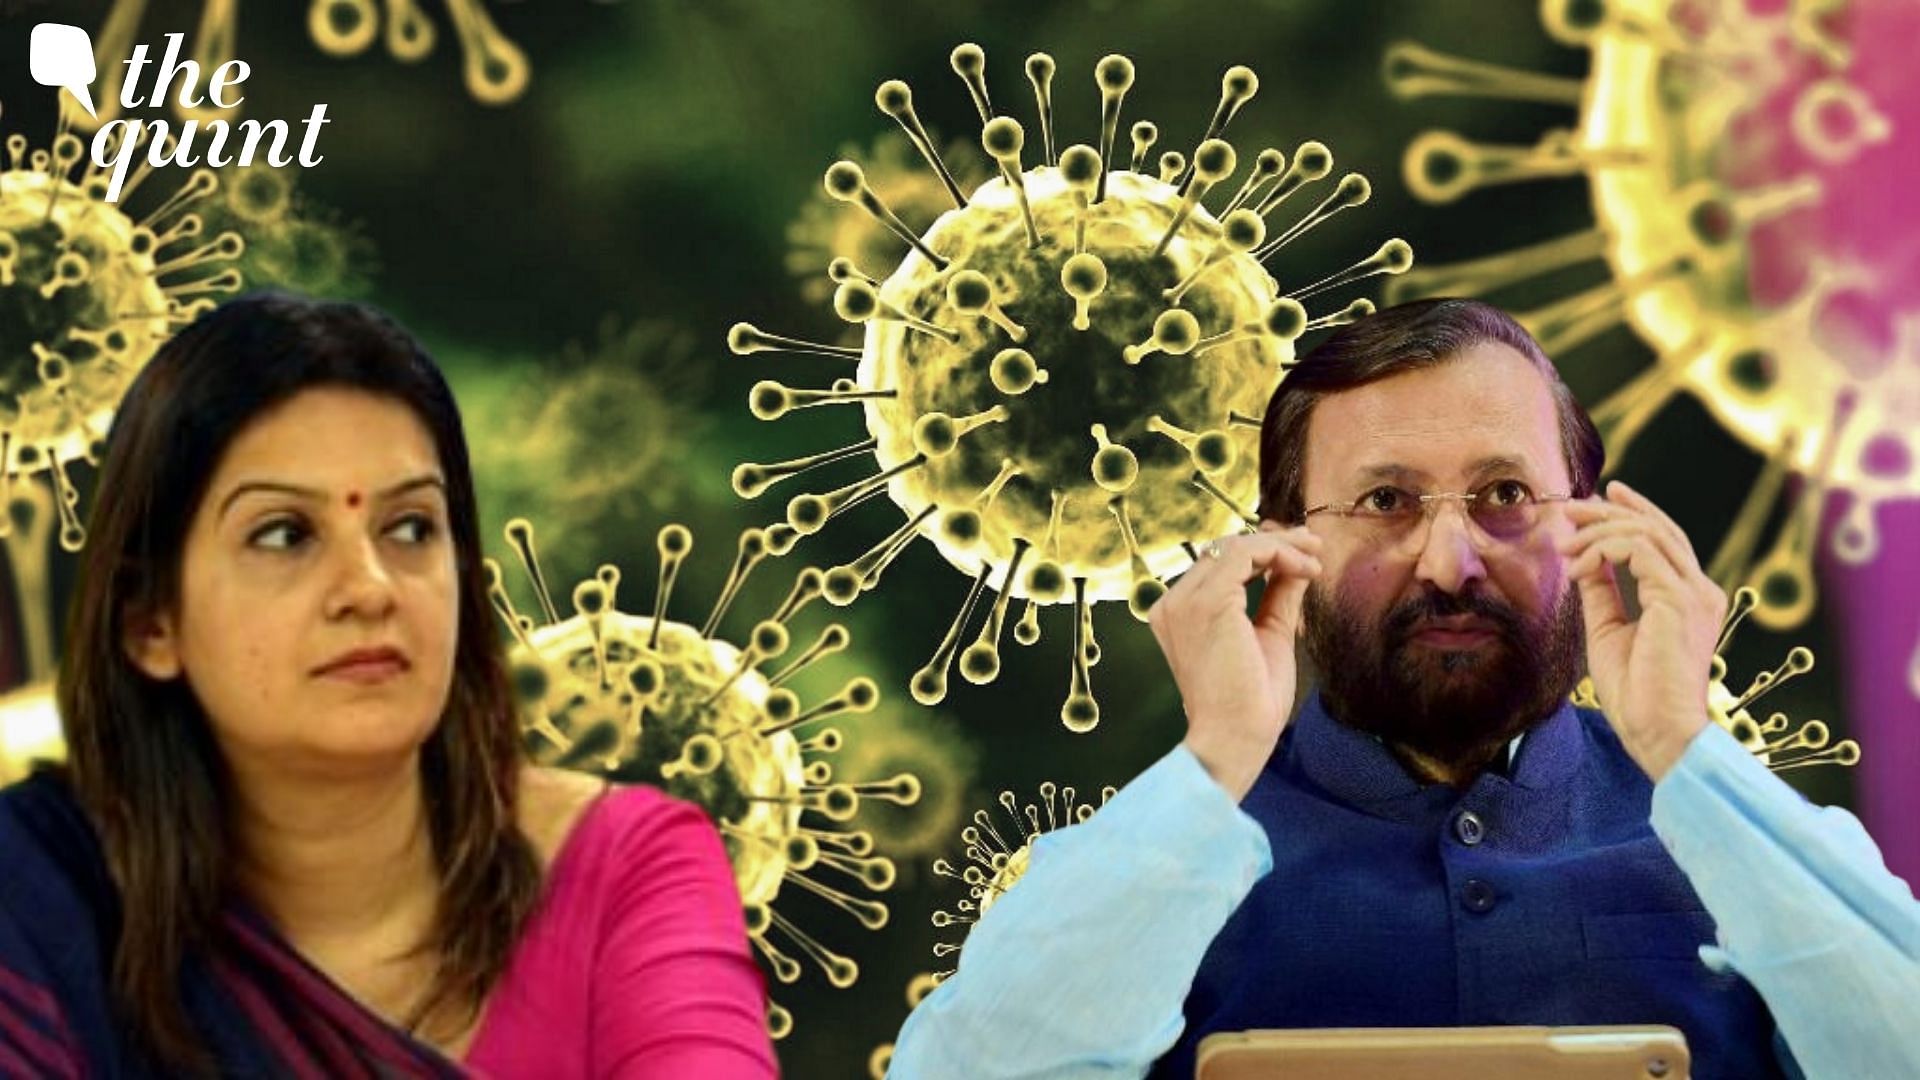 A spat appears to have ensued on Twitter between Shiv Sena leader Priyanka Chaturvedi and Rajya Sabha MP Prakash Javadekar on Wednesday, 17 March, with both accusing each other’s governments of not doing enough to vaccinate more Indians.